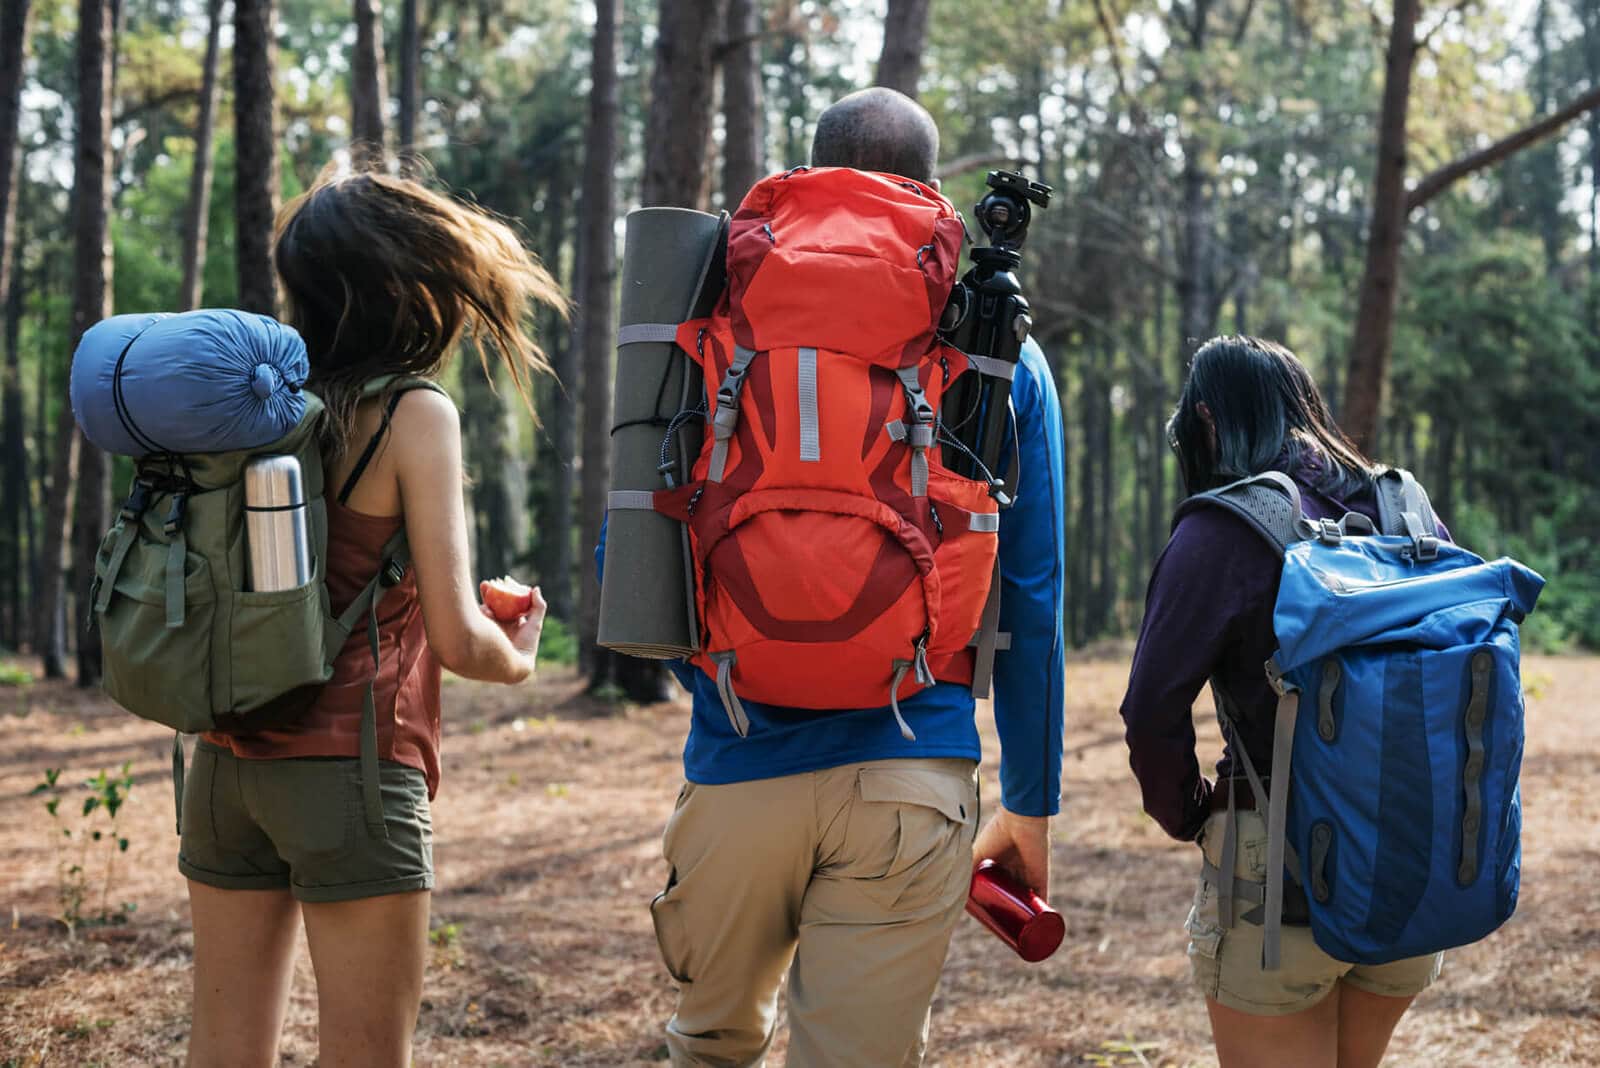 A group of three campers walking with backpacks gear